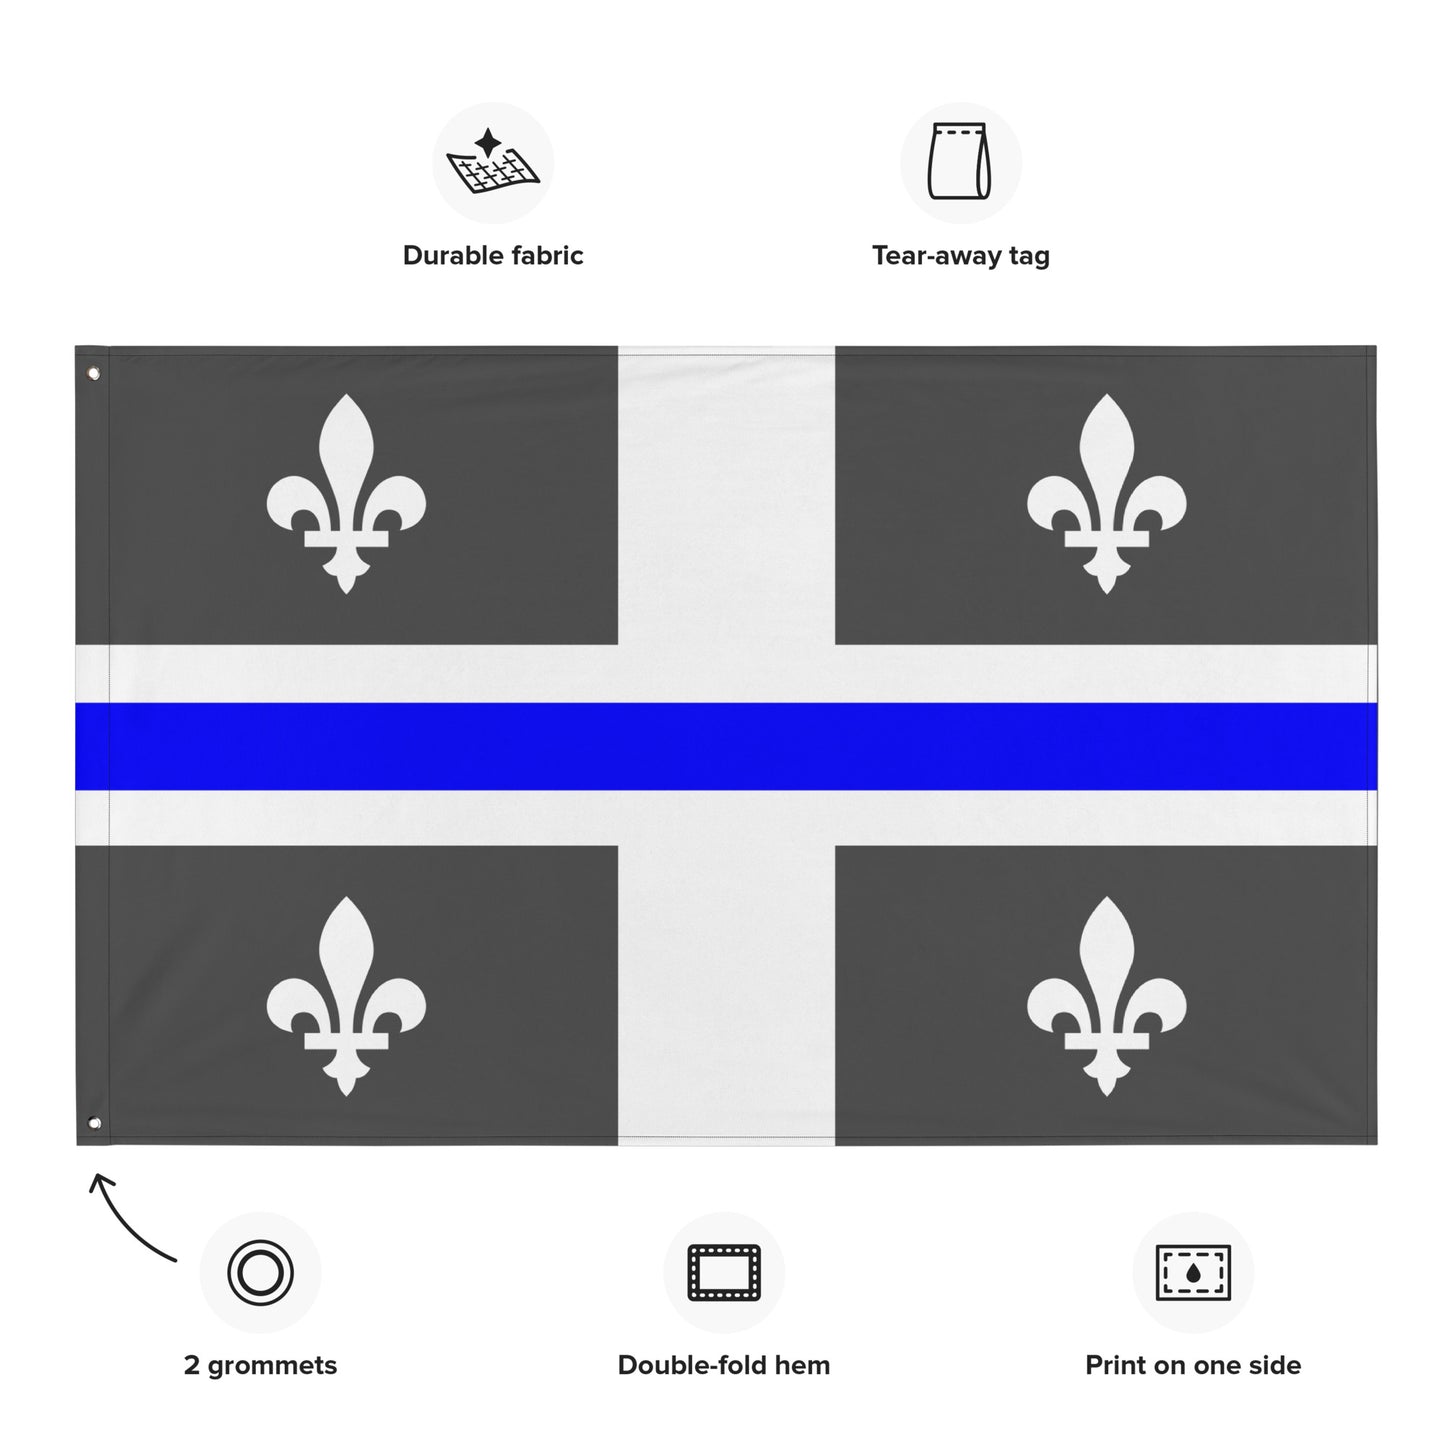 Subdued Quebec Thin Blue Line Canada Wall Flag-911 Duty Gear Canada-911 Duty Gear Canada